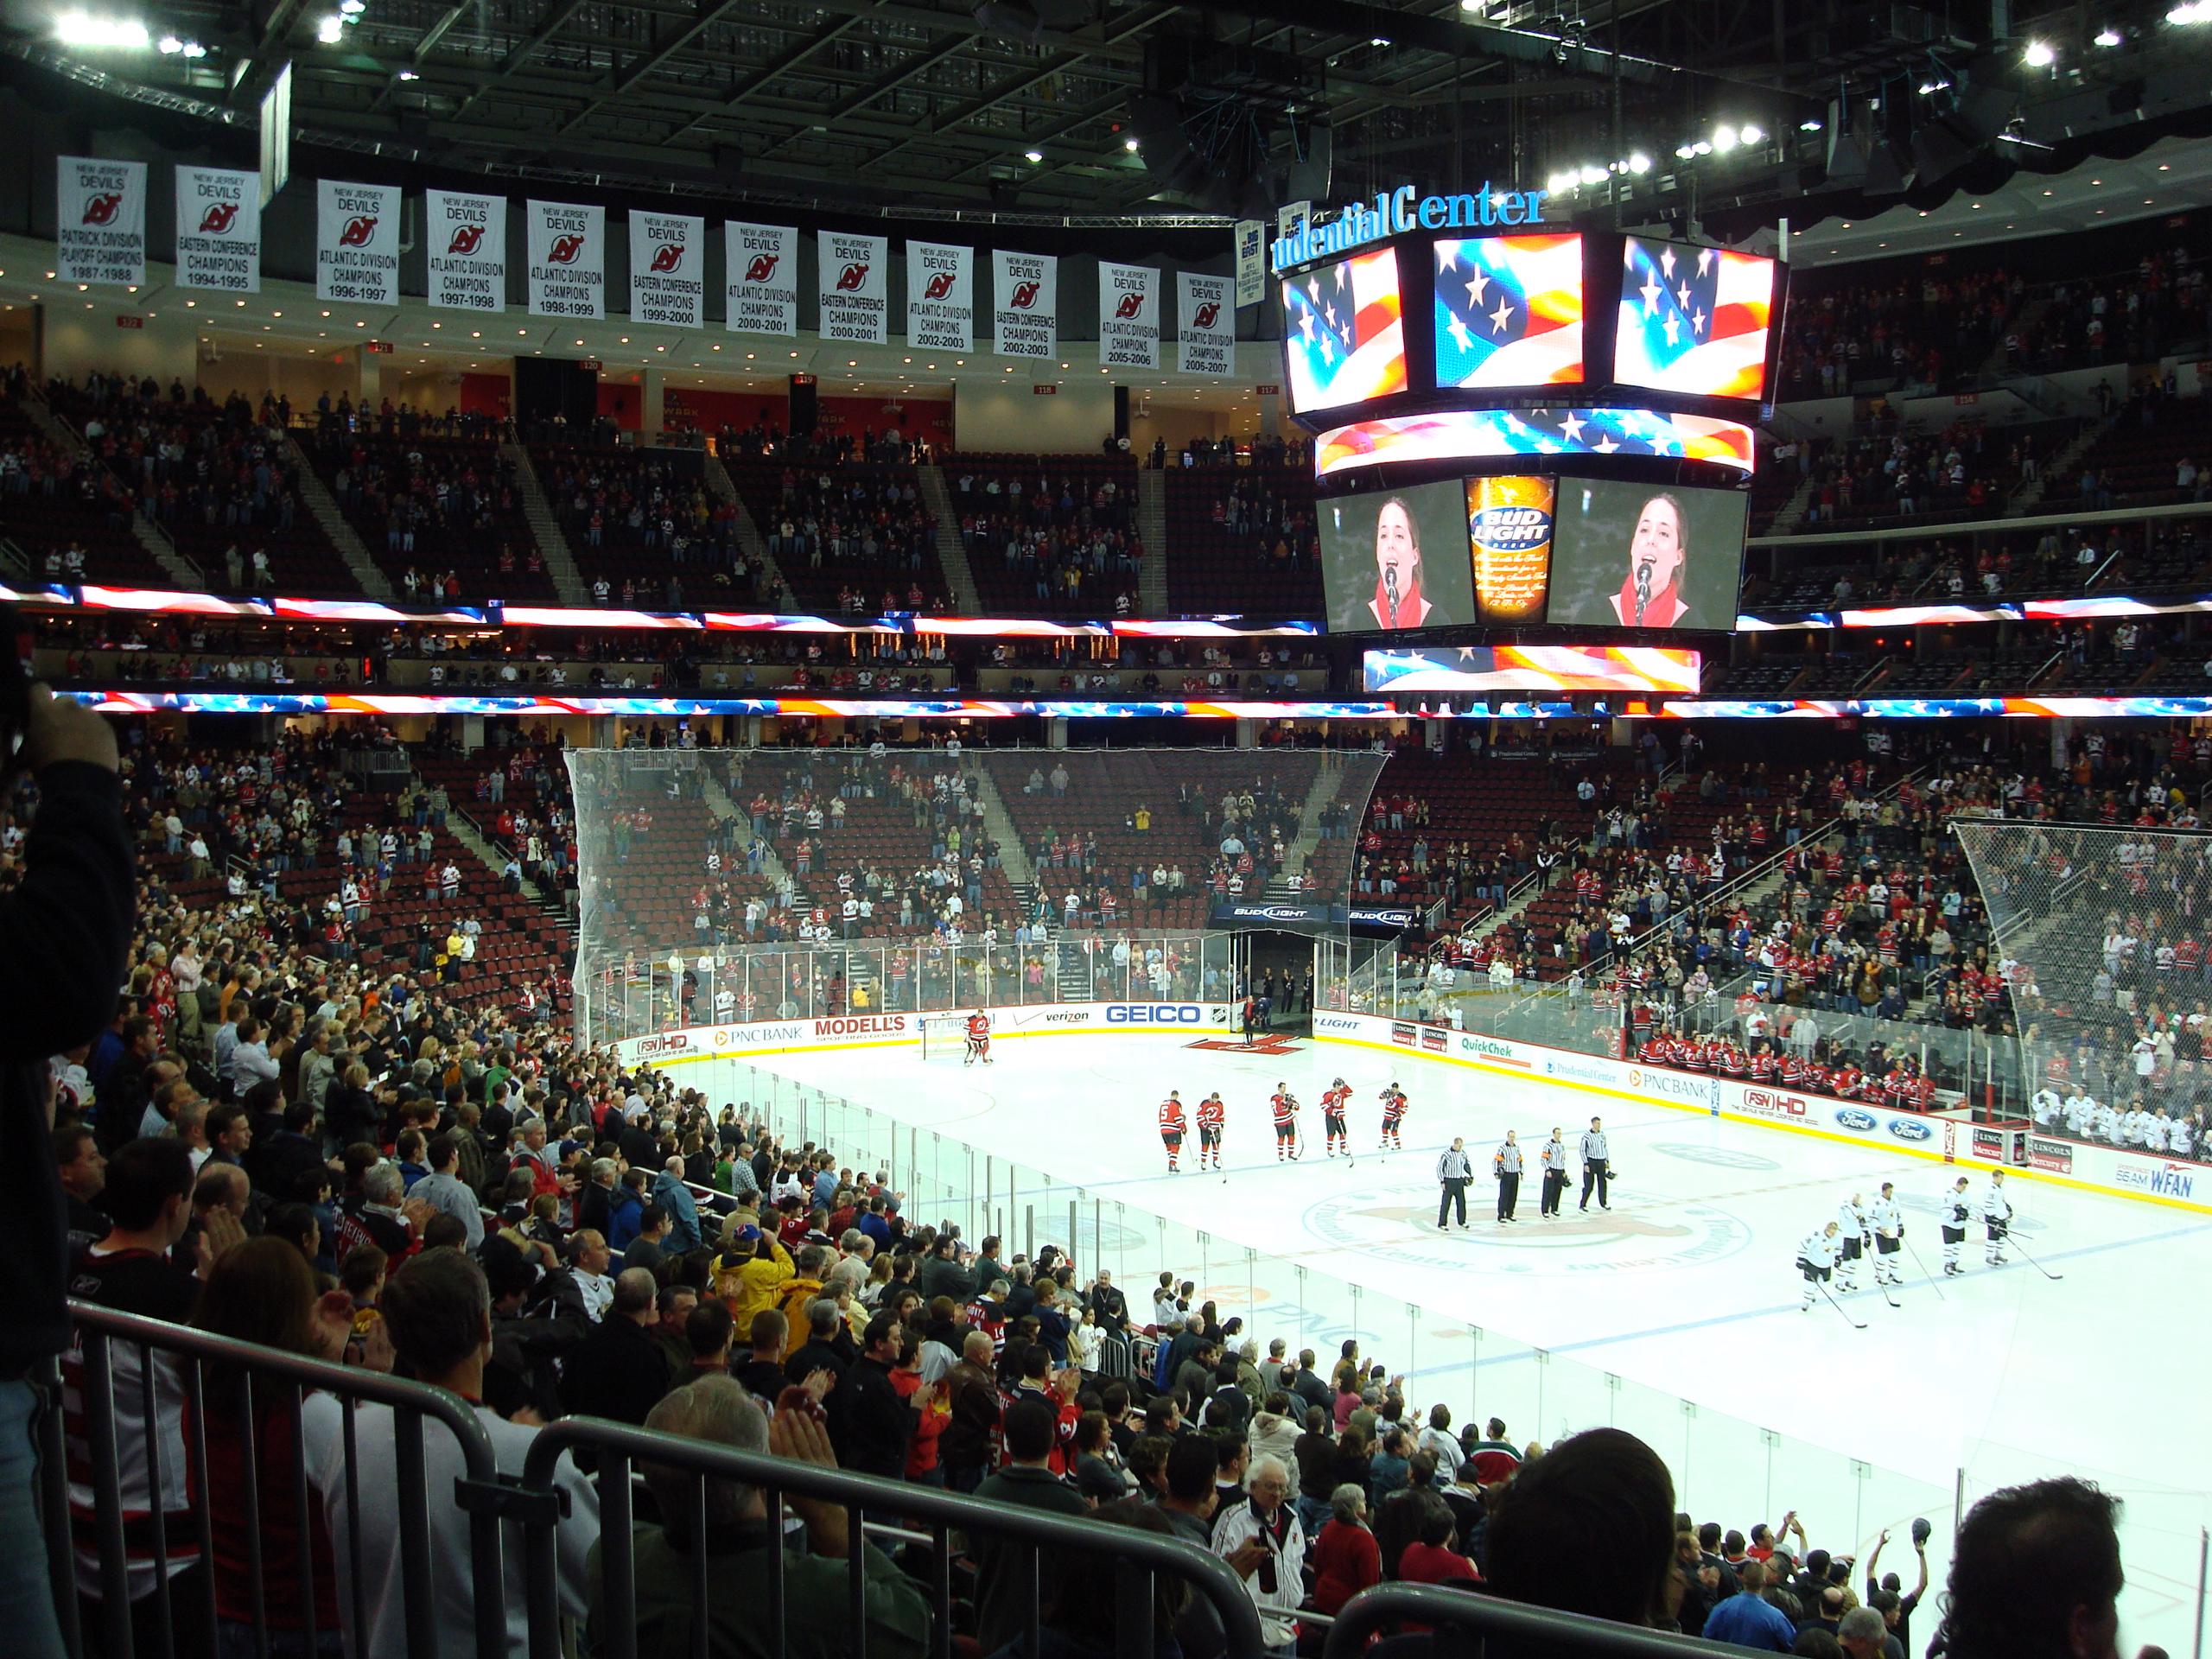 Prudential Center: New Jersey arena guide for 2023